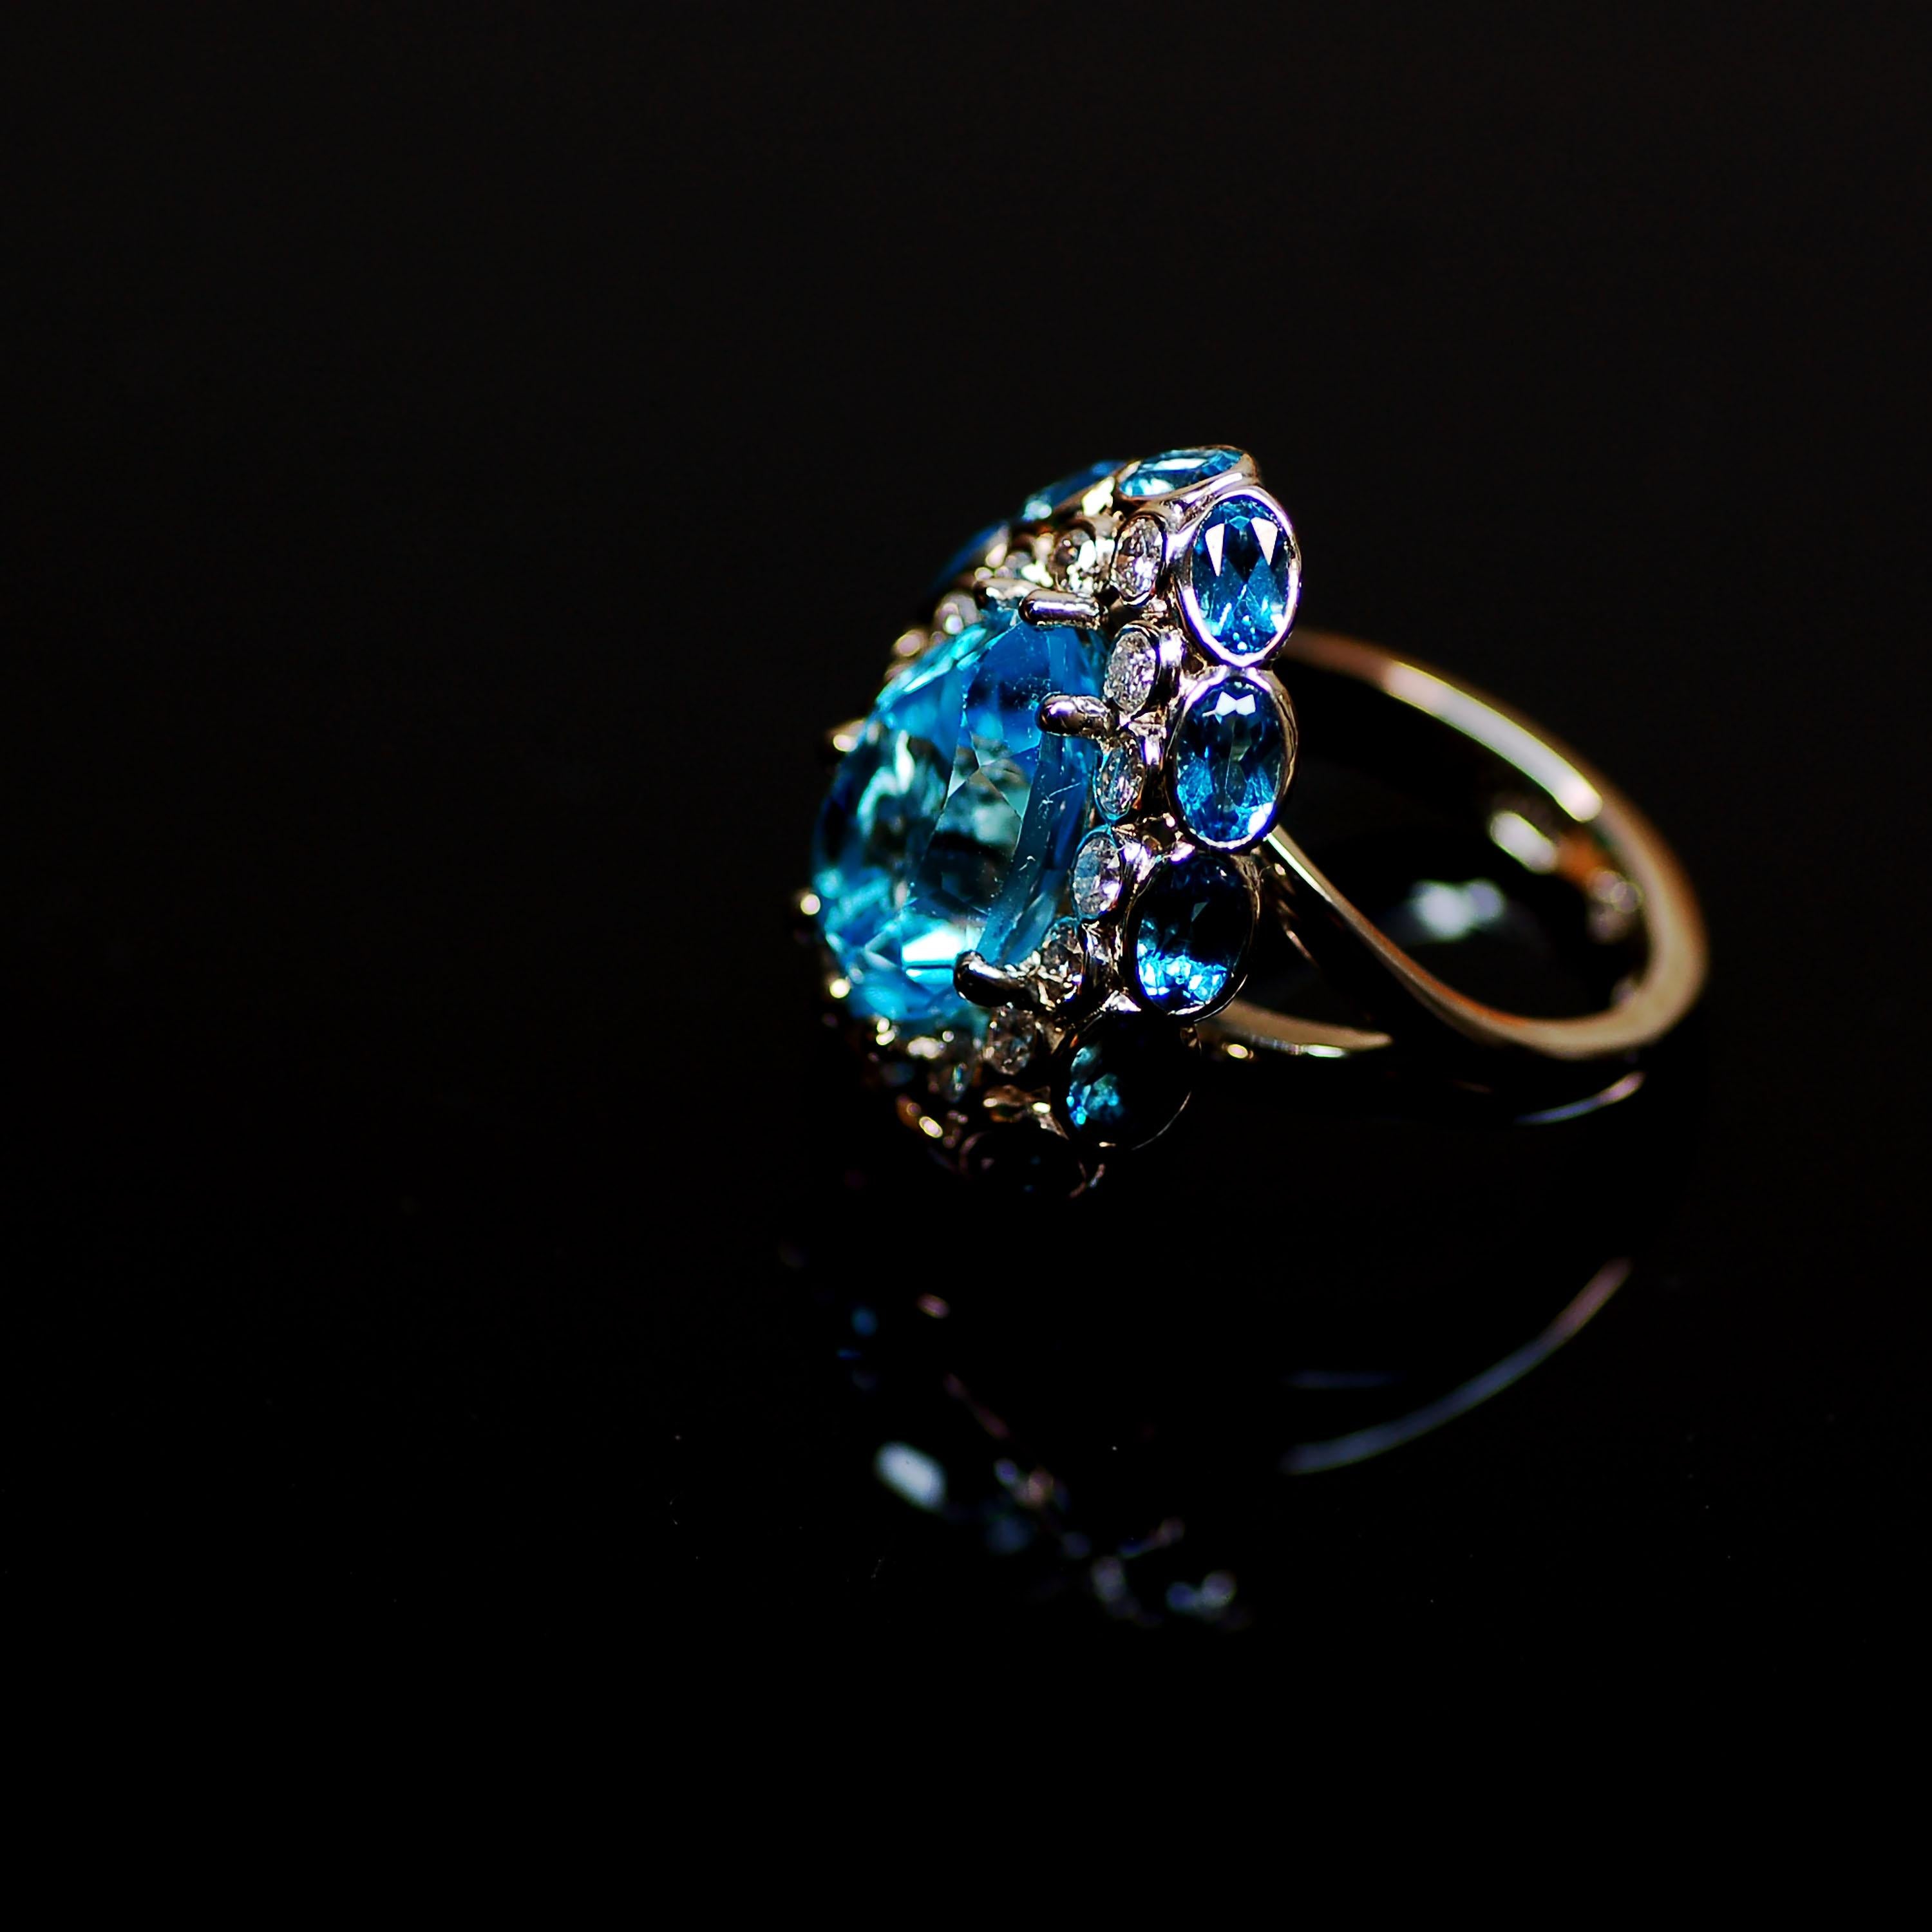 George III 18 Karat White Gold Neon Blue Aquamarines and Diamonds Cocktail Ring For Sale